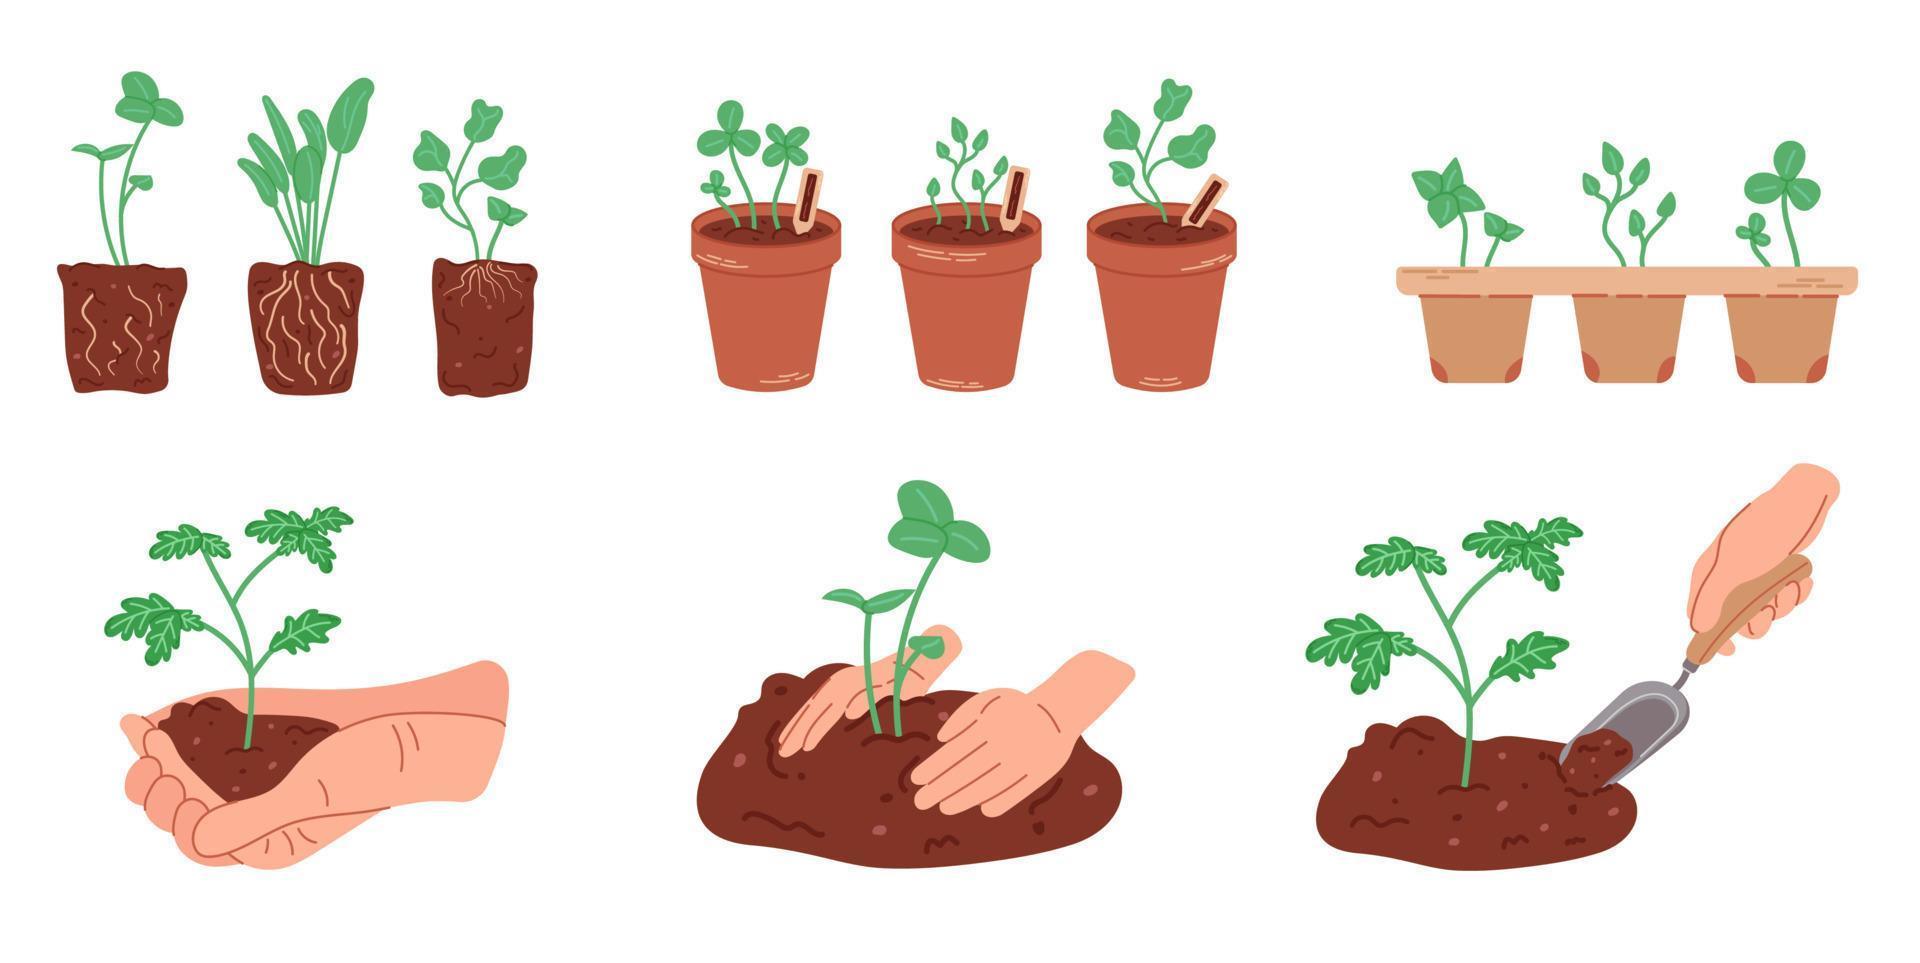 Flat cartoon vector illustration set of organic plant seedling. Seedlings growing in pots isolated on white background. Planting tree in the ground with human hands. Home gardening.